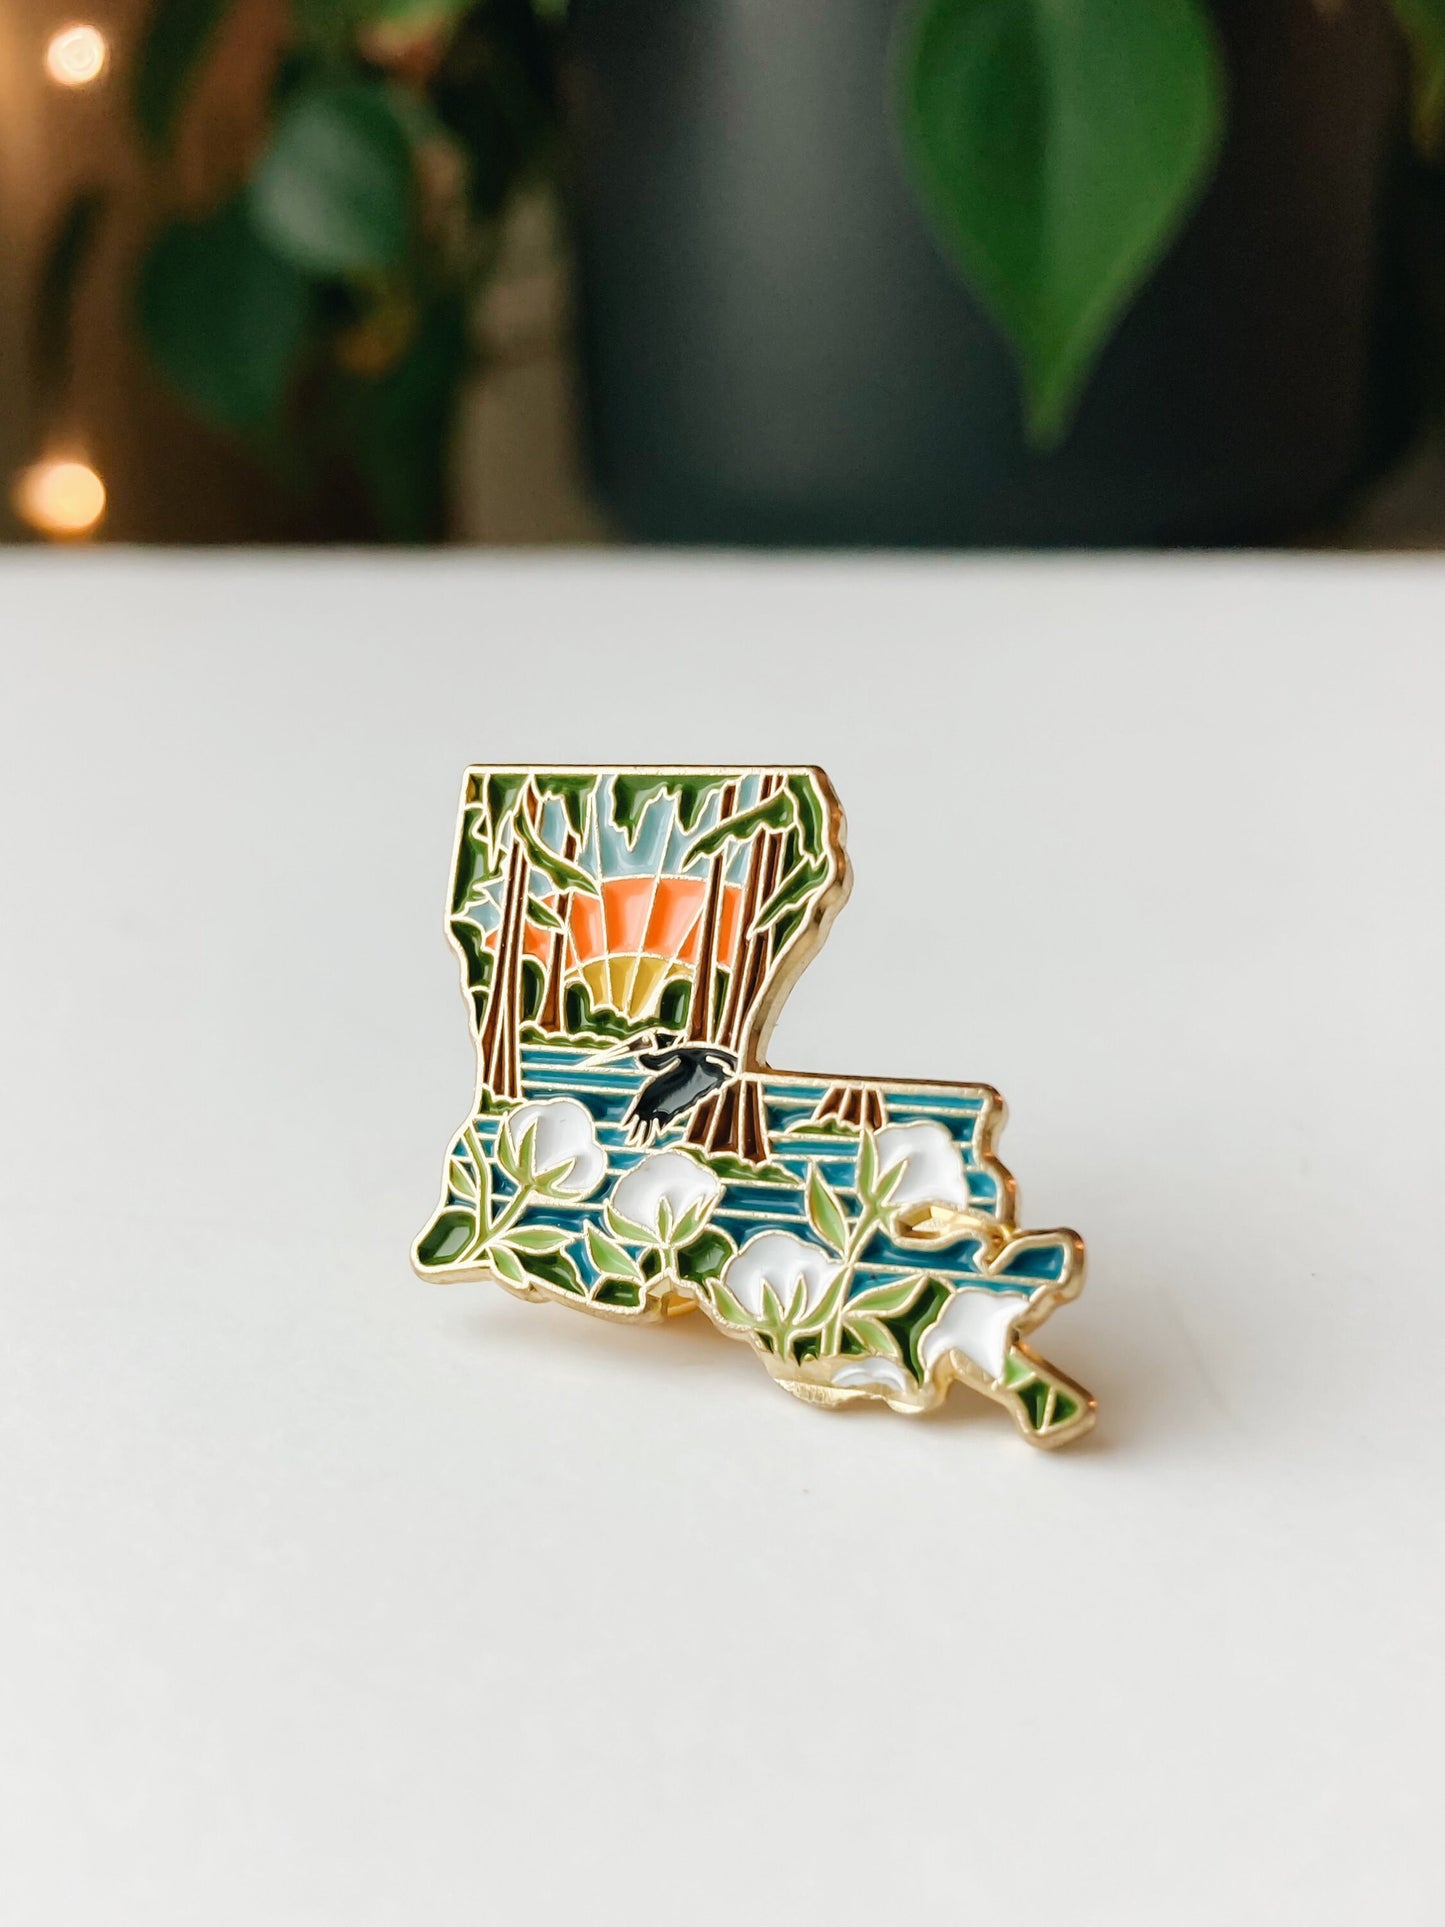 Louisiana Enamel Pin | Gold Soft Enamel Pin | Illustrated United States Pin | Butterfly Clasp | 1.25"